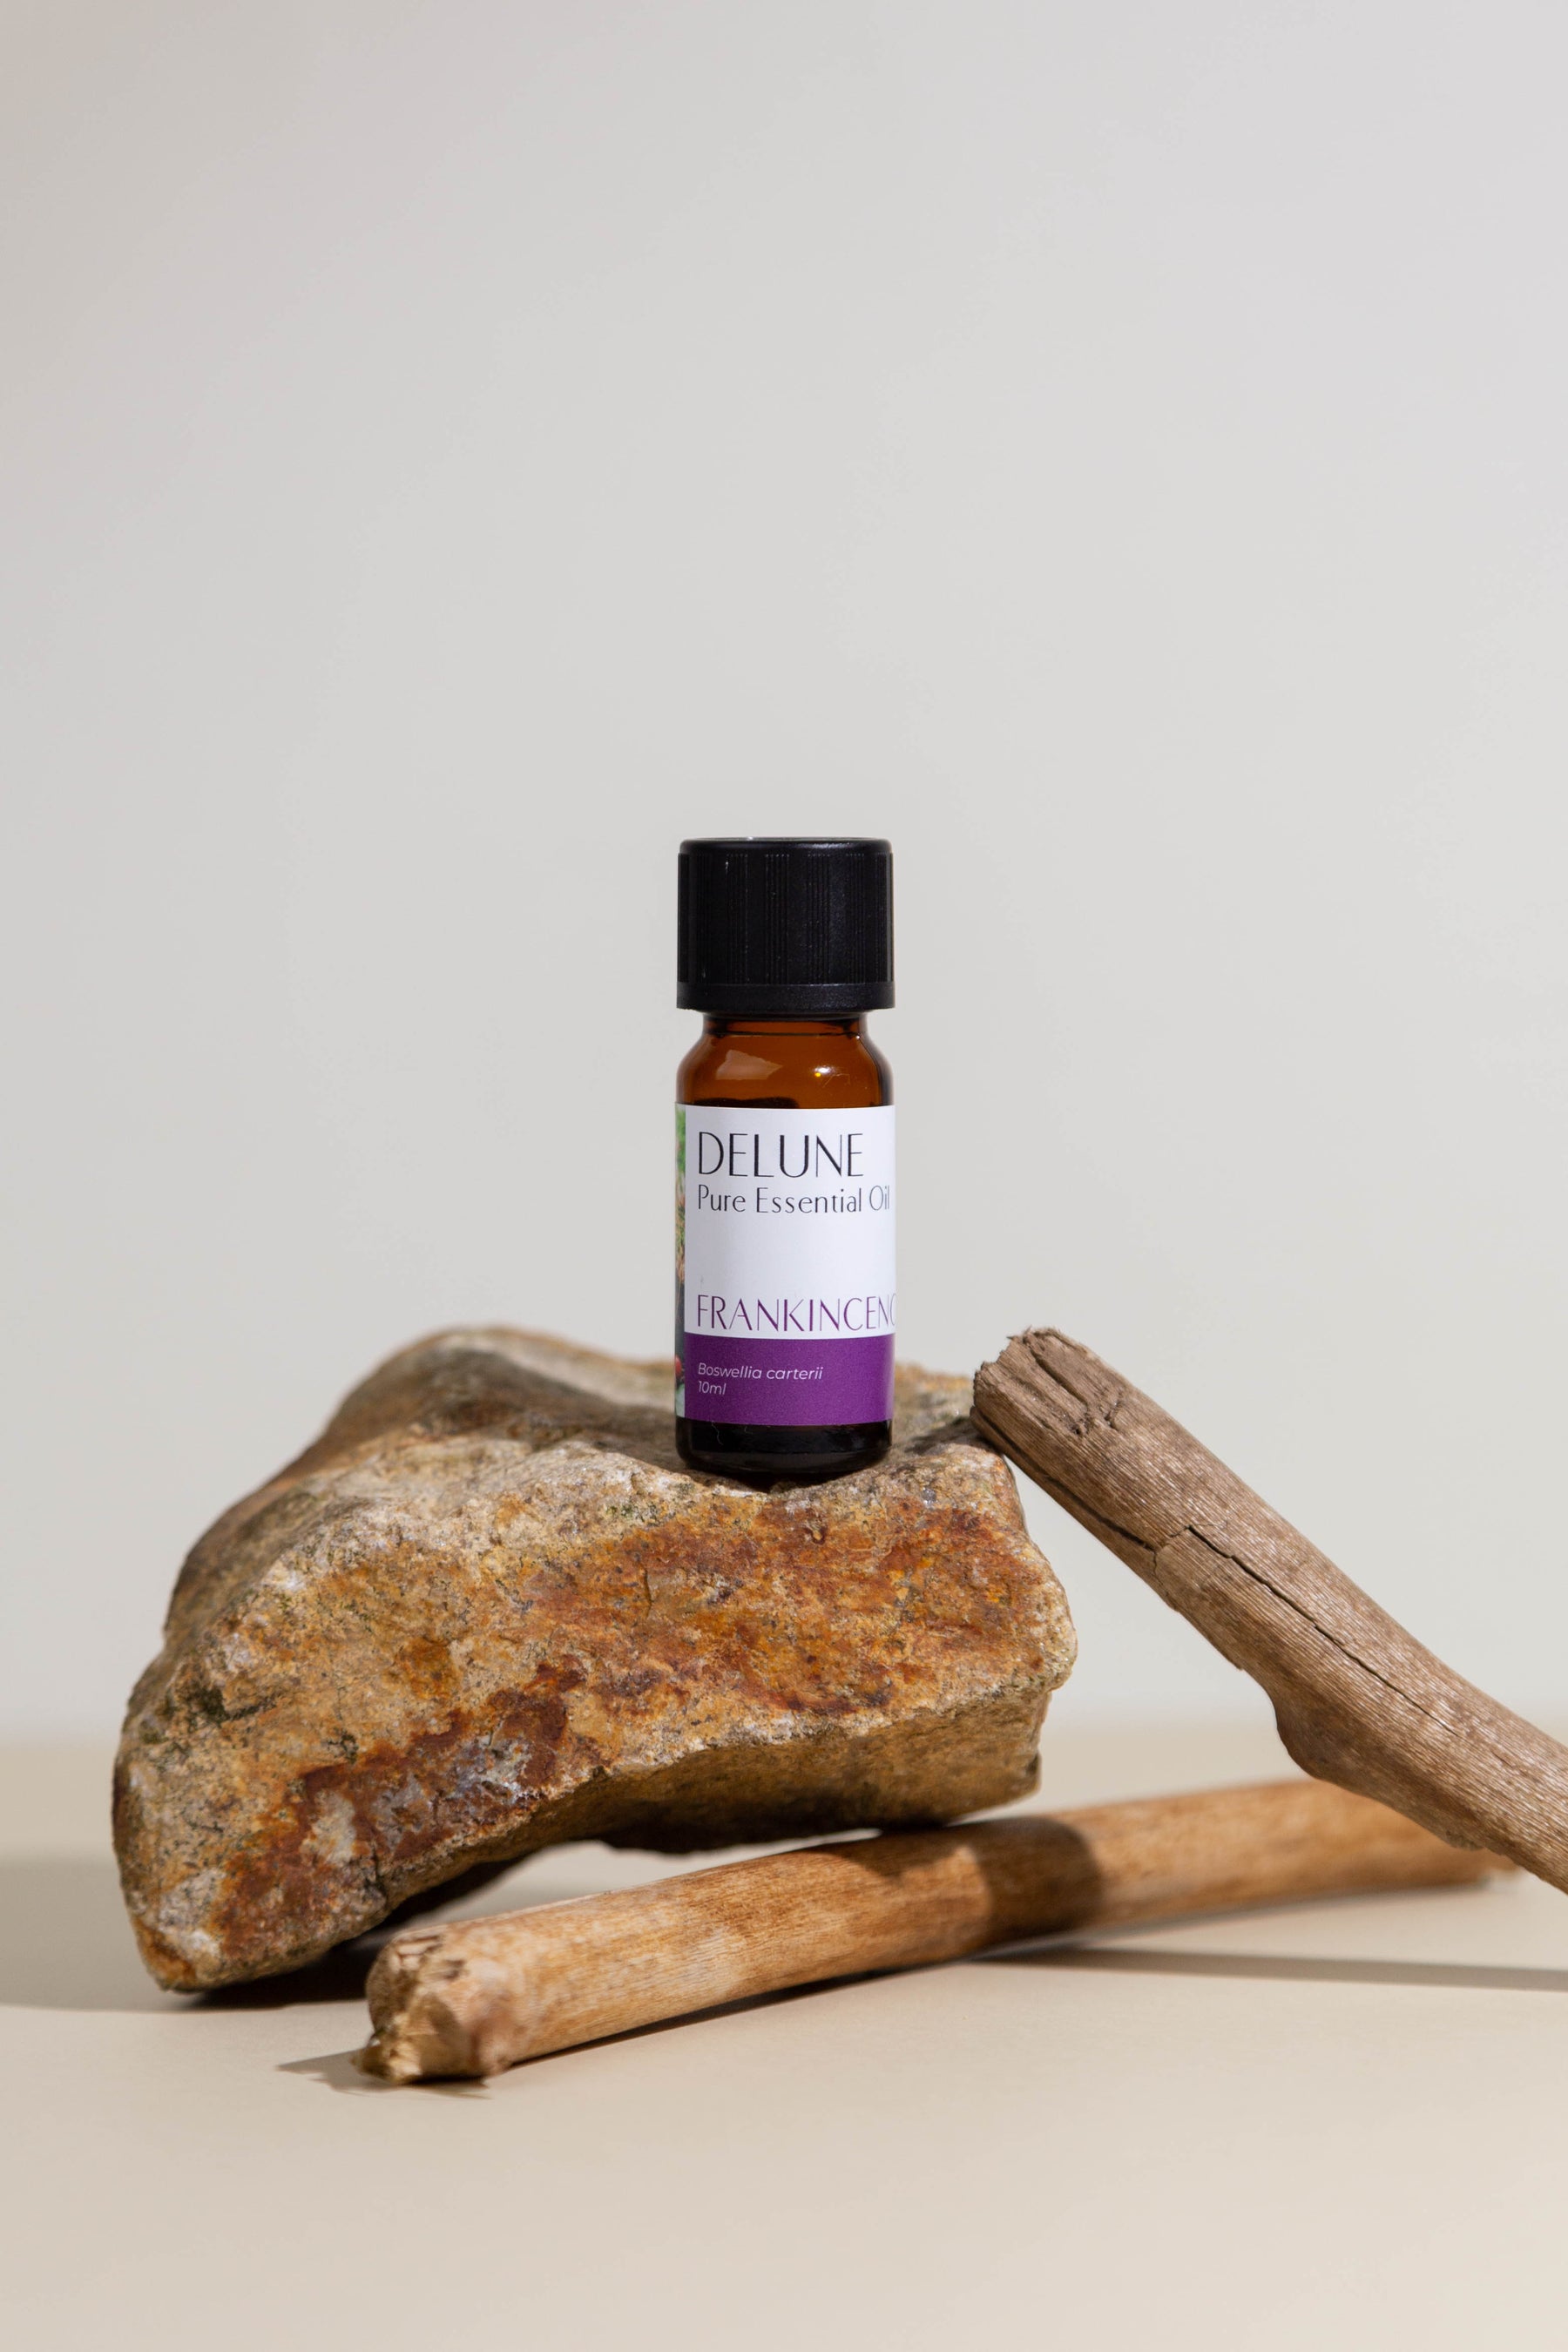 Delune's Pure Essential Oils for Headache Relief: Does It Work?